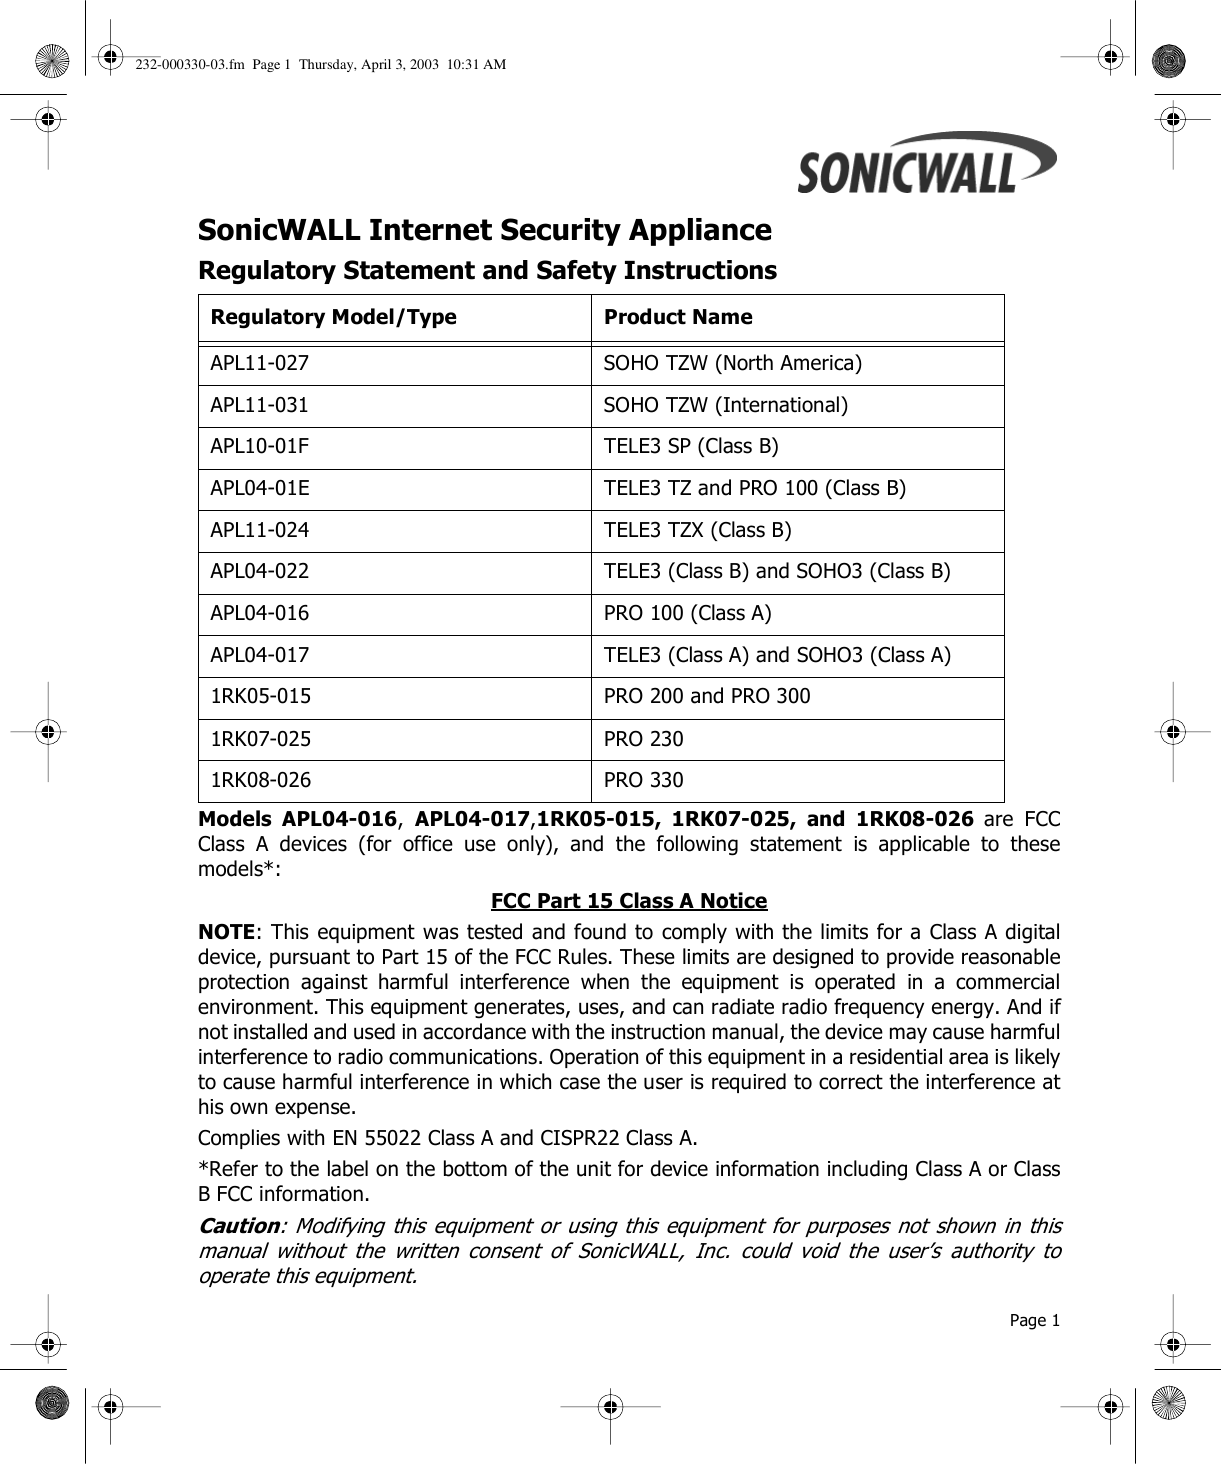  Page 1SonicWALL Internet Security Appliance Regulatory Statement and Safety InstructionsModels APL04-016,  APL04-017,1RK05-015, 1RK07-025, and 1RK08-026 are FCCClass A devices (for office use only), and the following statement is applicable to thesemodels*:FCC Part 15 Class A Notice NOTE: This equipment was tested and found to comply with the limits for a Class A digitaldevice, pursuant to Part 15 of the FCC Rules. These limits are designed to provide reasonableprotection against harmful interference when the equipment is operated in a commercialenvironment. This equipment generates, uses, and can radiate radio frequency energy. And ifnot installed and used in accordance with the instruction manual, the device may cause harmfulinterference to radio communications. Operation of this equipment in a residential area is likelyto cause harmful interference in which case the user is required to correct the interference athis own expense. Complies with EN 55022 Class A and CISPR22 Class A. *Refer to the label on the bottom of the unit for device information including Class A or ClassB FCC information. Caution: Modifying this equipment or using this equipment for purposes not shown in thismanual without the written consent of SonicWALL, Inc. could void the user’s authority tooperate this equipment. Regulatory Model/Type Product NameAPL11-027 SOHO TZW (North America)APL11-031 SOHO TZW (International)APL10-01F TELE3 SP (Class B)APL04-01E TELE3 TZ and PRO 100 (Class B)APL11-024 TELE3 TZX (Class B)APL04-022 TELE3 (Class B) and SOHO3 (Class B)APL04-016 PRO 100 (Class A)APL04-017 TELE3 (Class A) and SOHO3 (Class A)1RK05-015 PRO 200 and PRO 3001RK07-025 PRO 2301RK08-026 PRO 330232-000330-03.fm  Page 1  Thursday, April 3, 2003  10:31 AM